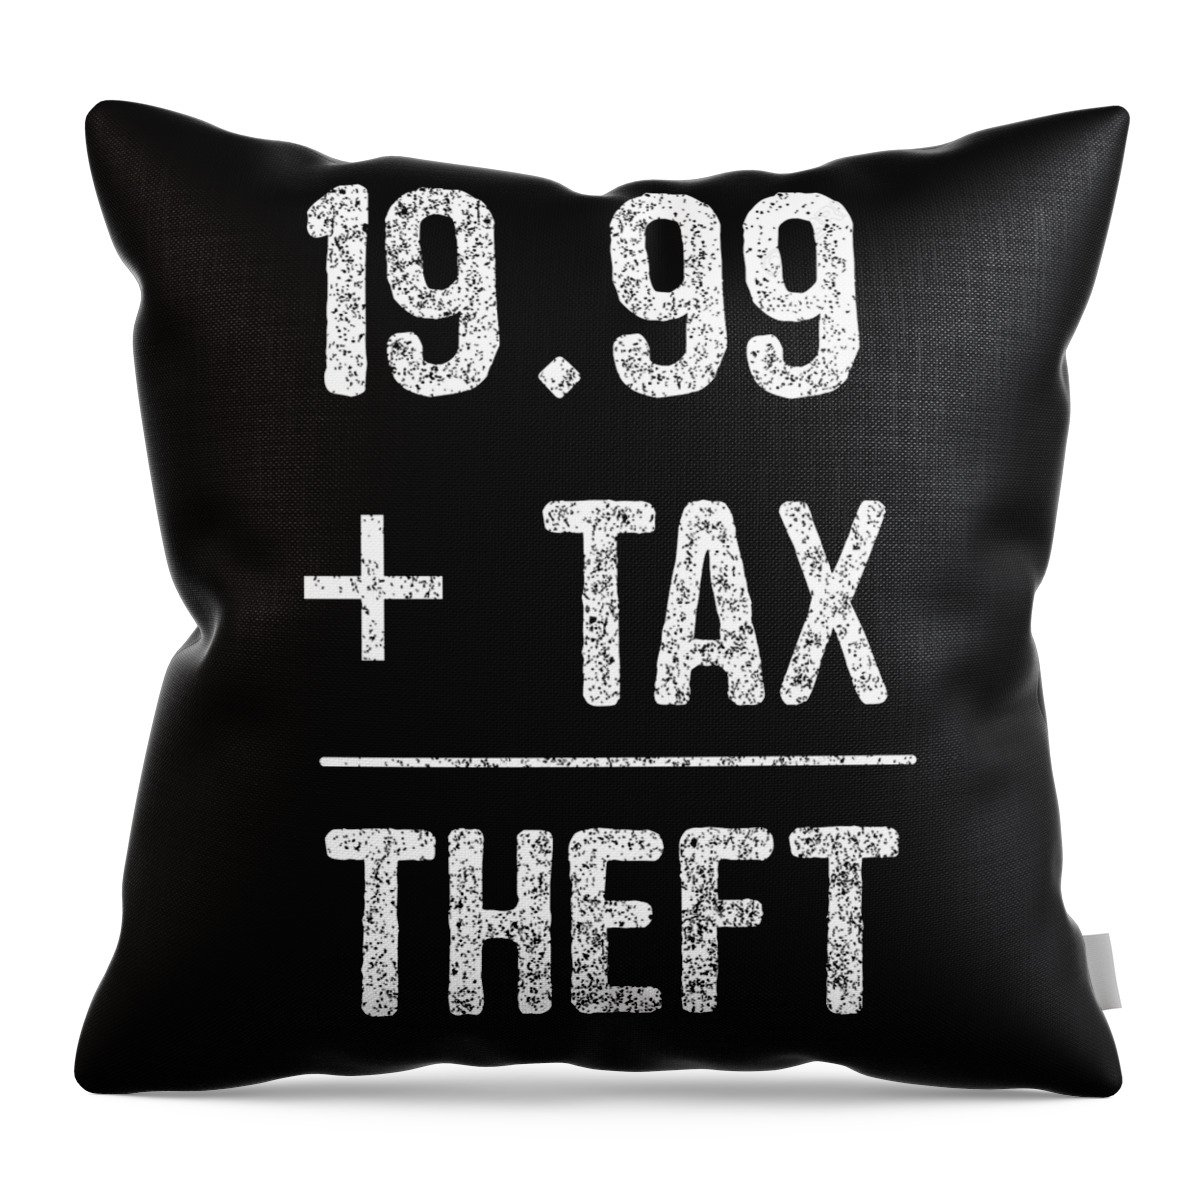 Funny Throw Pillow featuring the digital art 1999 Plus Tax Equals Taxation Is Theft by Flippin Sweet Gear